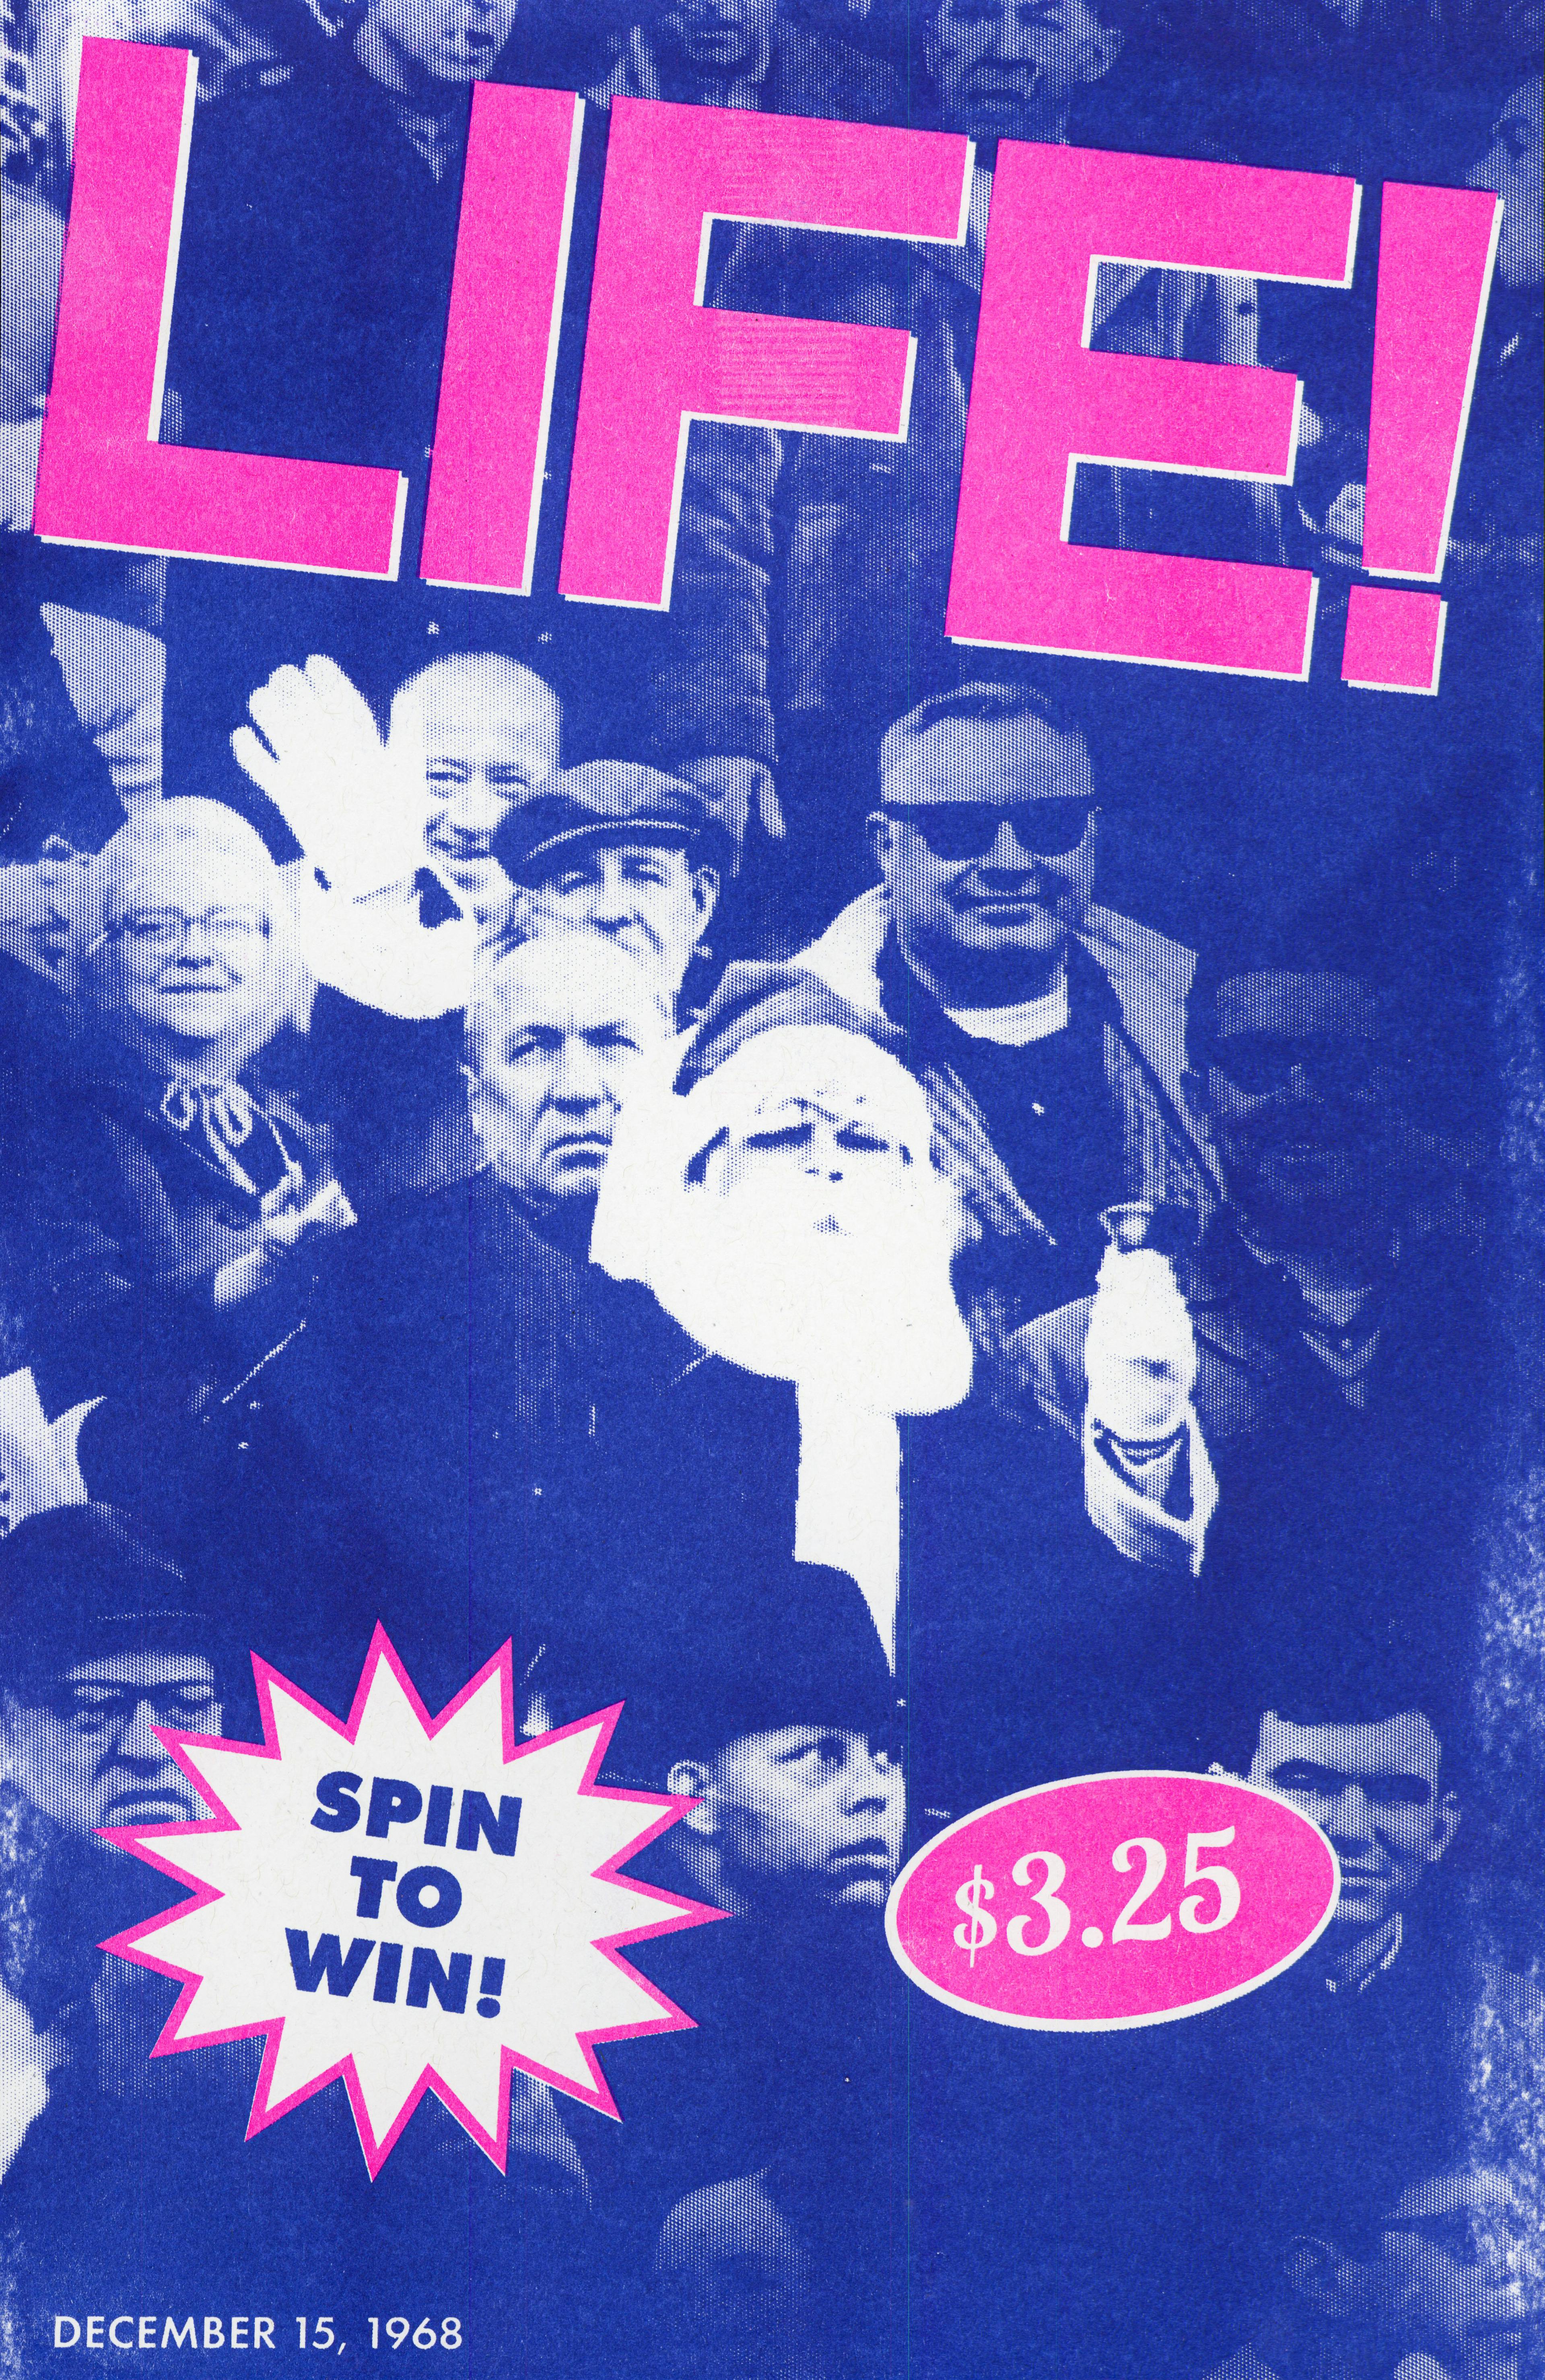 A blue poster with "LIFE" in big pink letters with a picture of Santa Claus